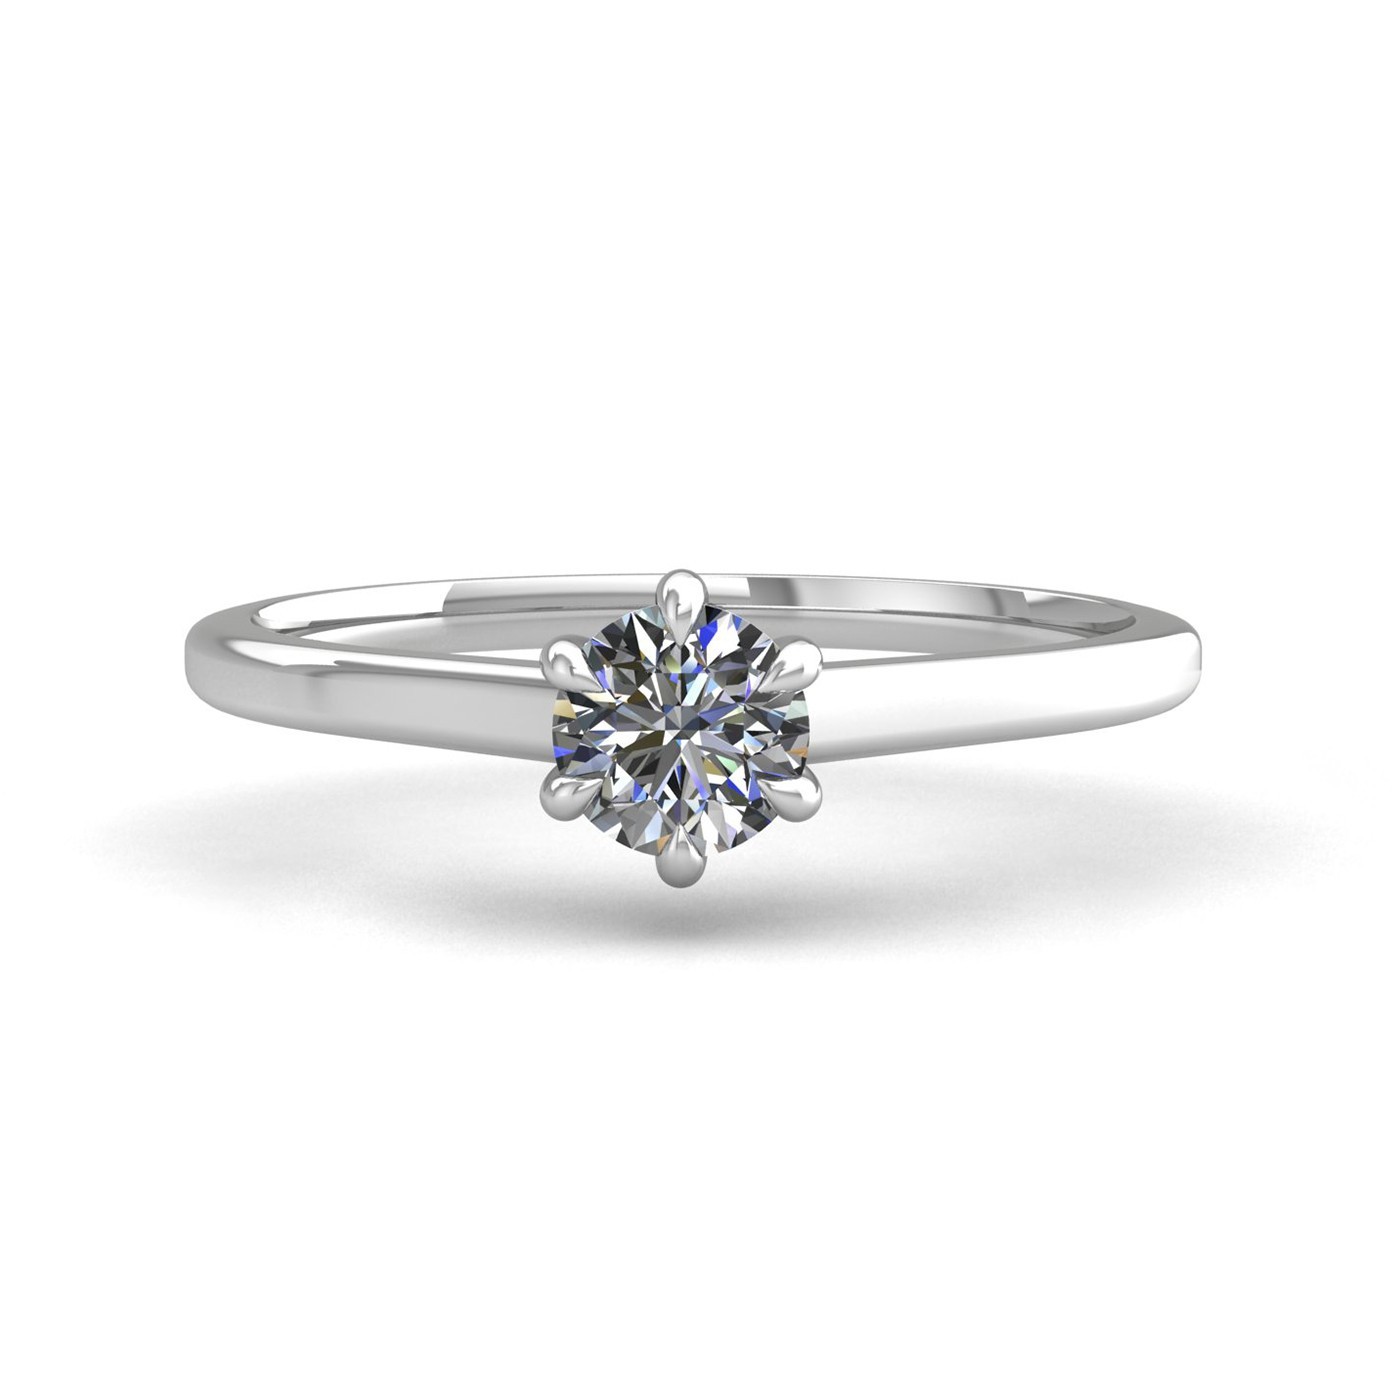 18k white gold 1,00 ct 6 prongs solitaire round cut diamond engagement ring with whisper thin band Photos & images